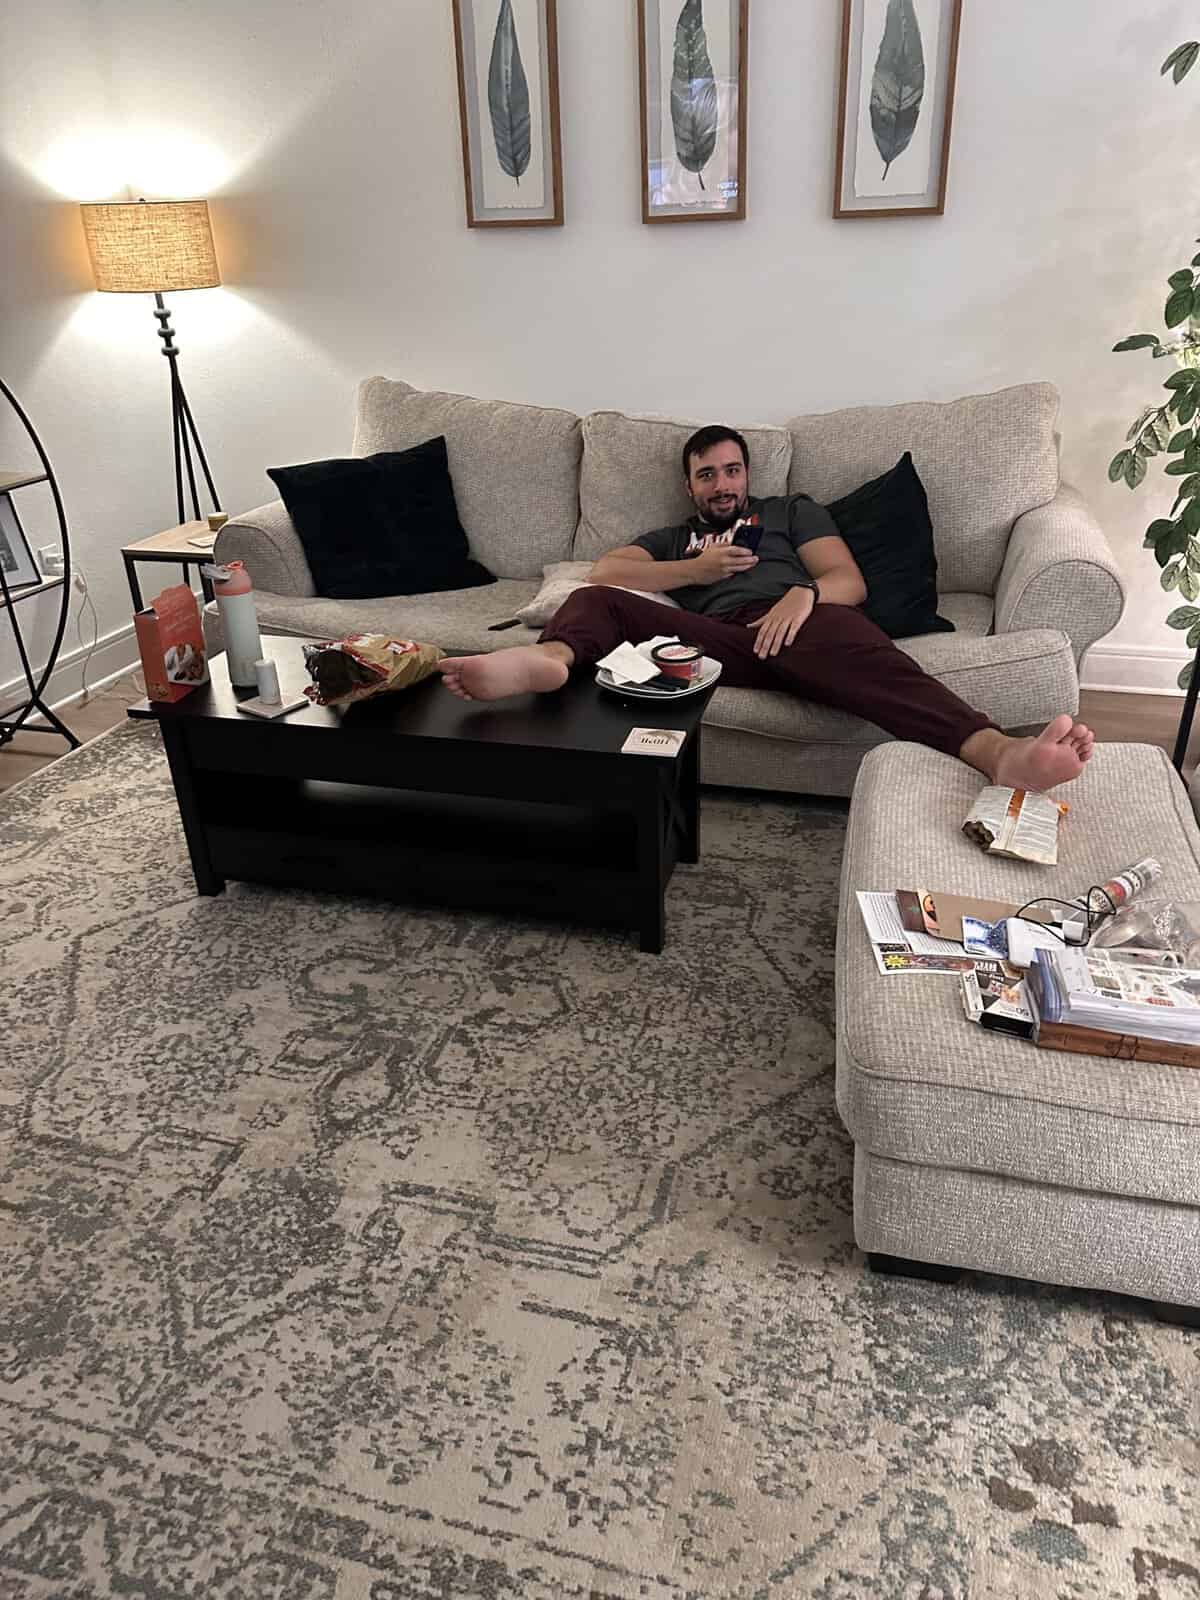 A man laying in a weird position on the couch. 